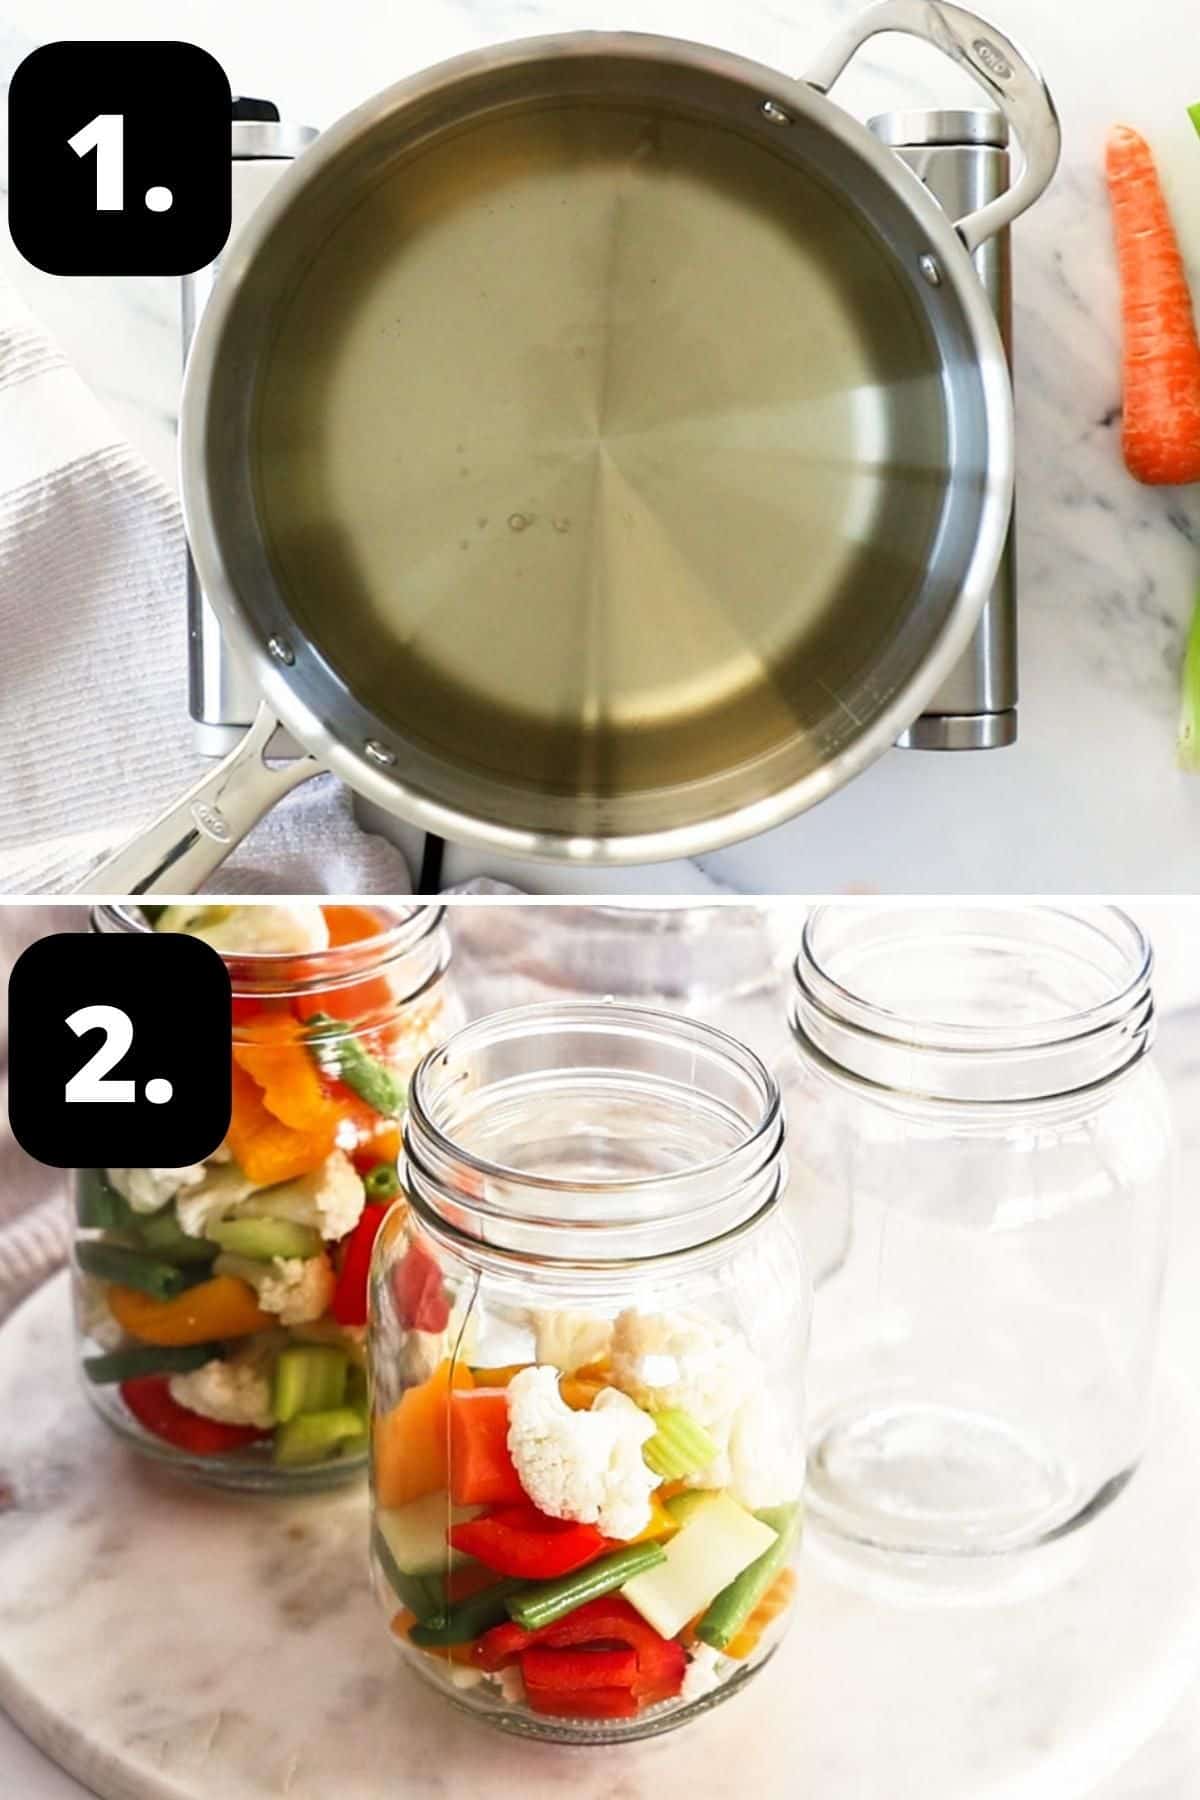 Steps 1-2 of preparing this recipe: making the pickling brine in a saucepan and starting to fill the jars with vegetables.